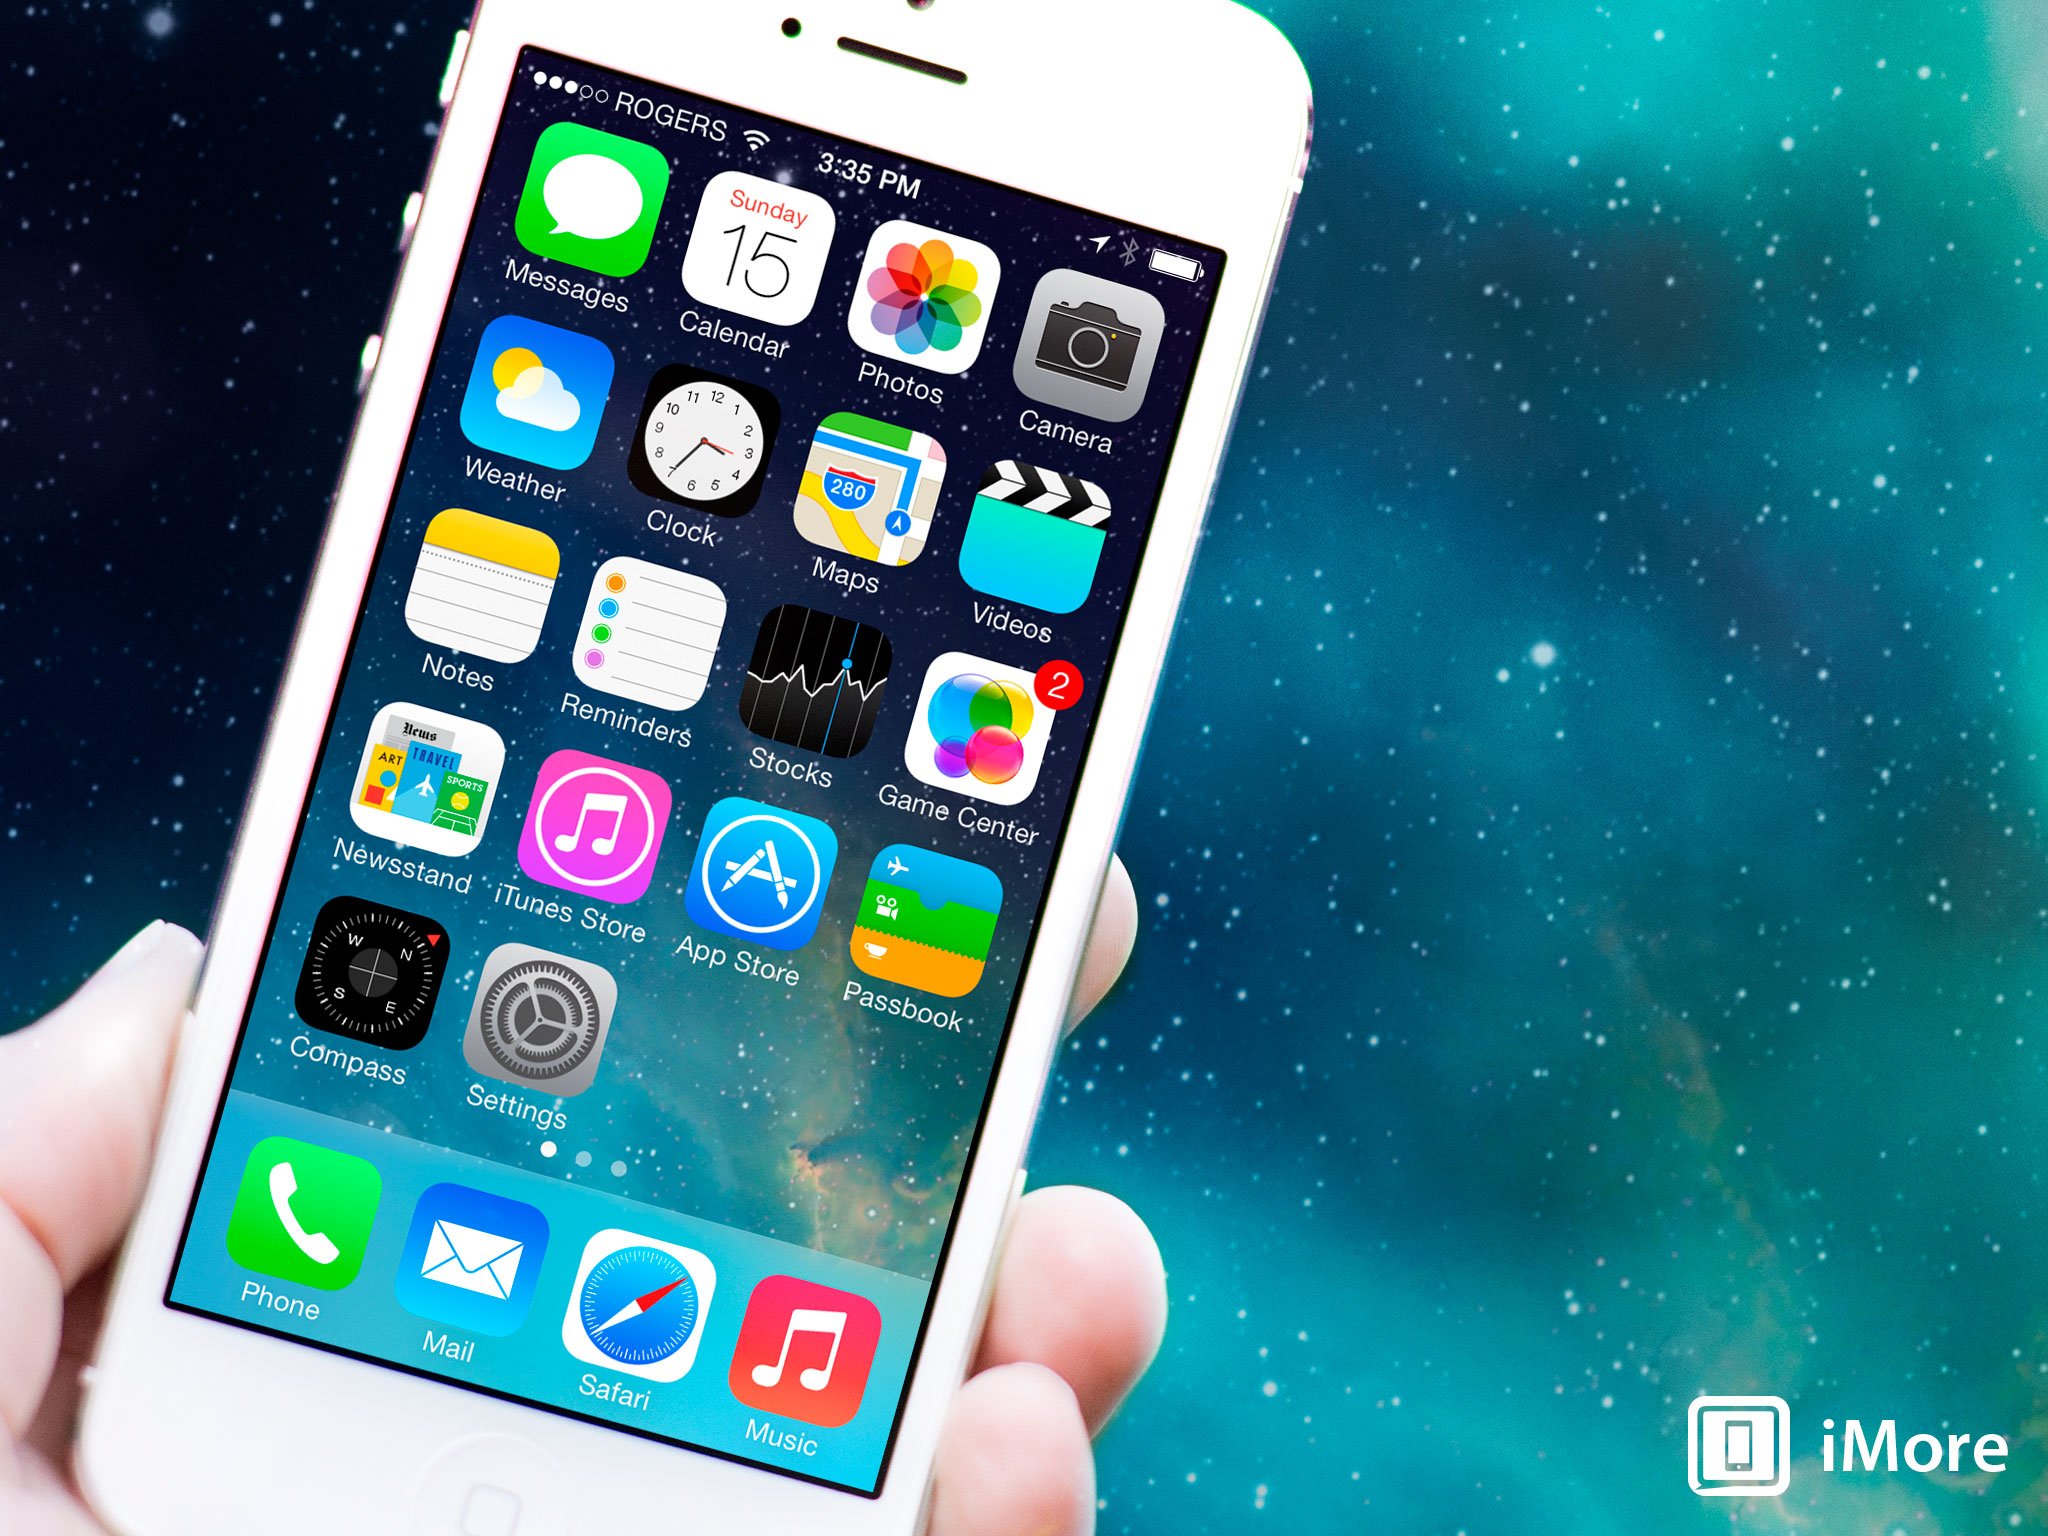 Complete review of Apple's completely redesigned iOS 7 software update for iPhone, iPod touch, and iPad